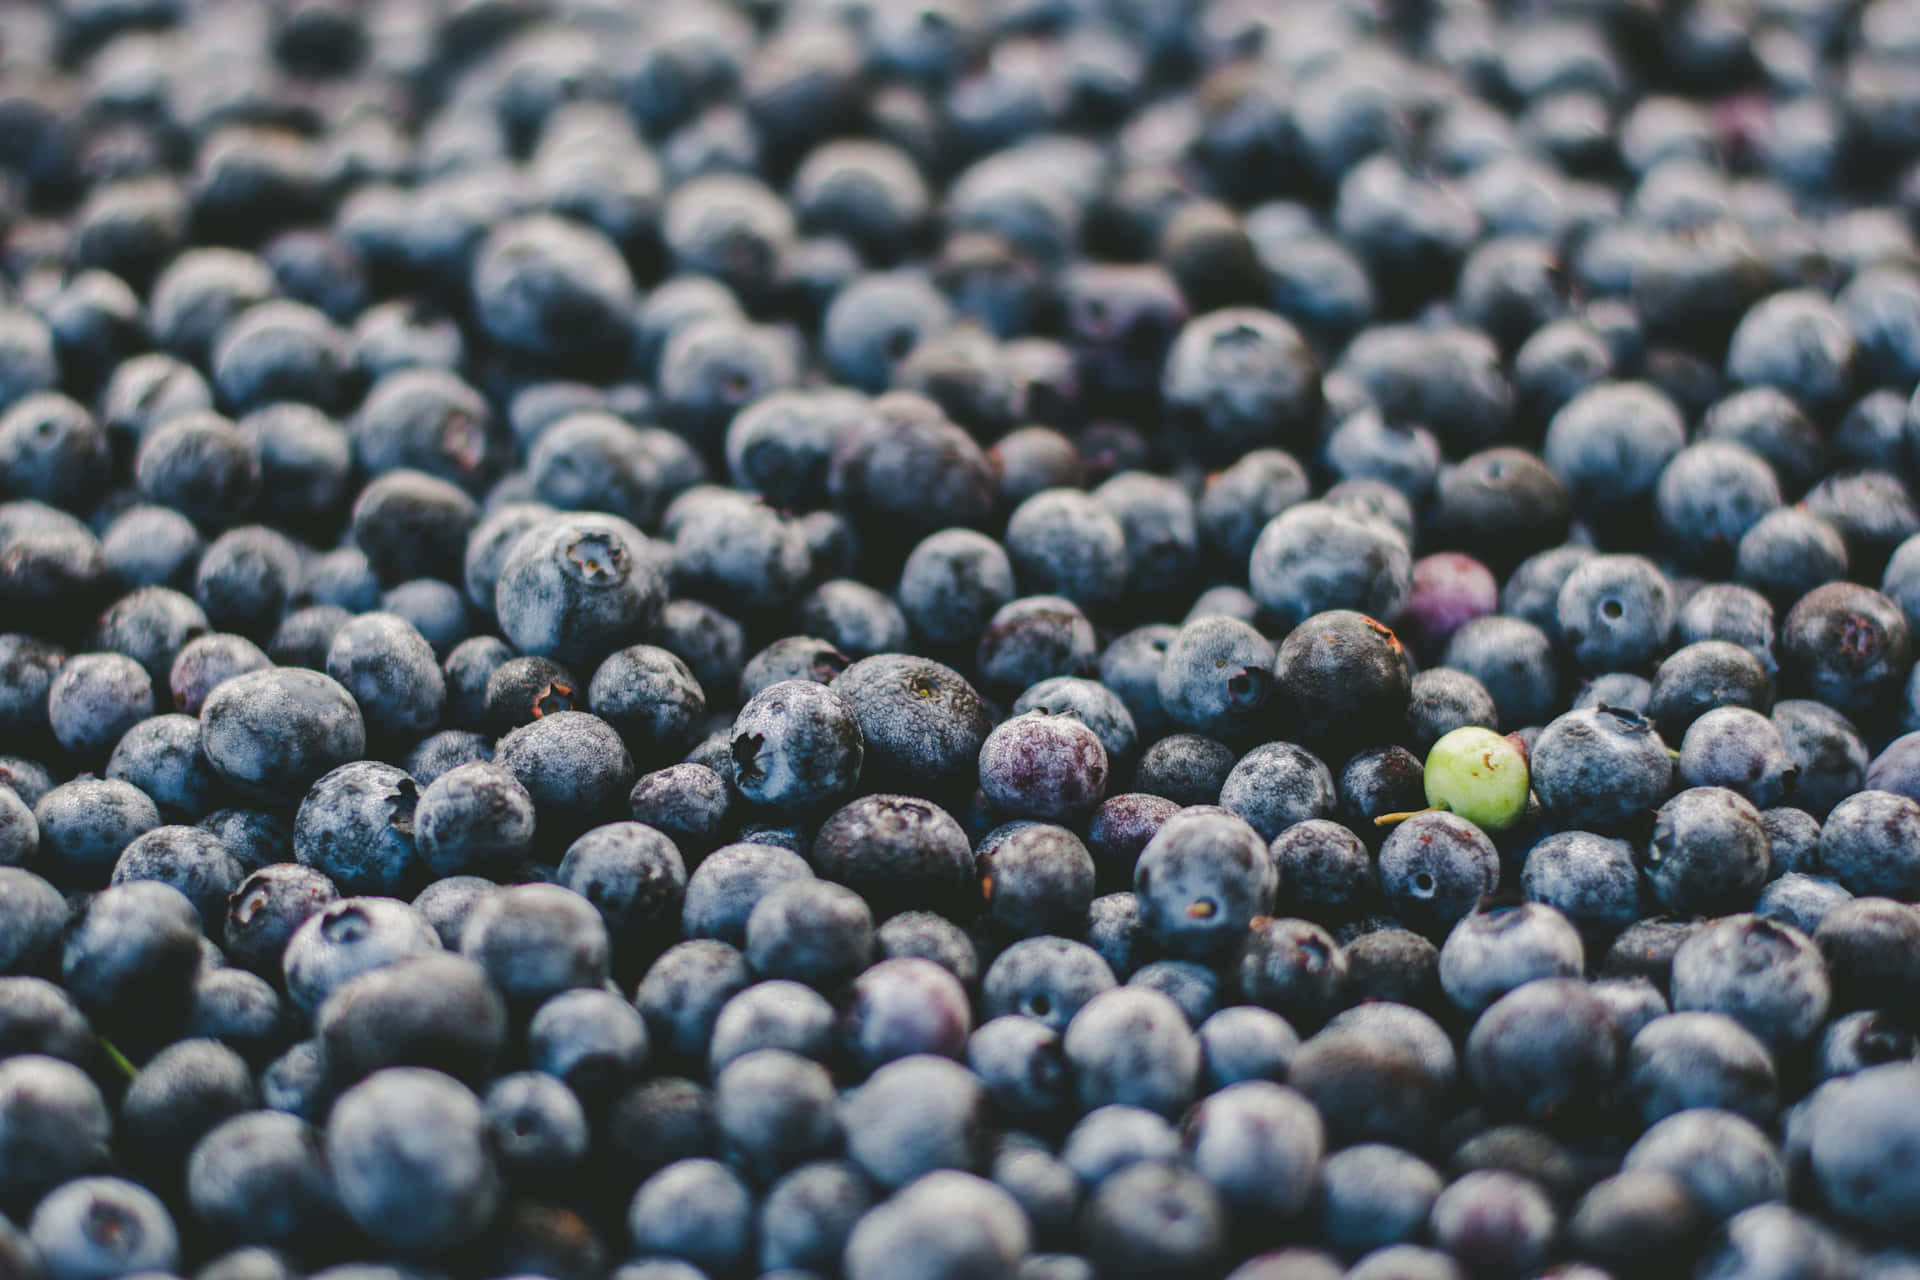 Conspicuous Green Berry Among Blueberries Wallpaper